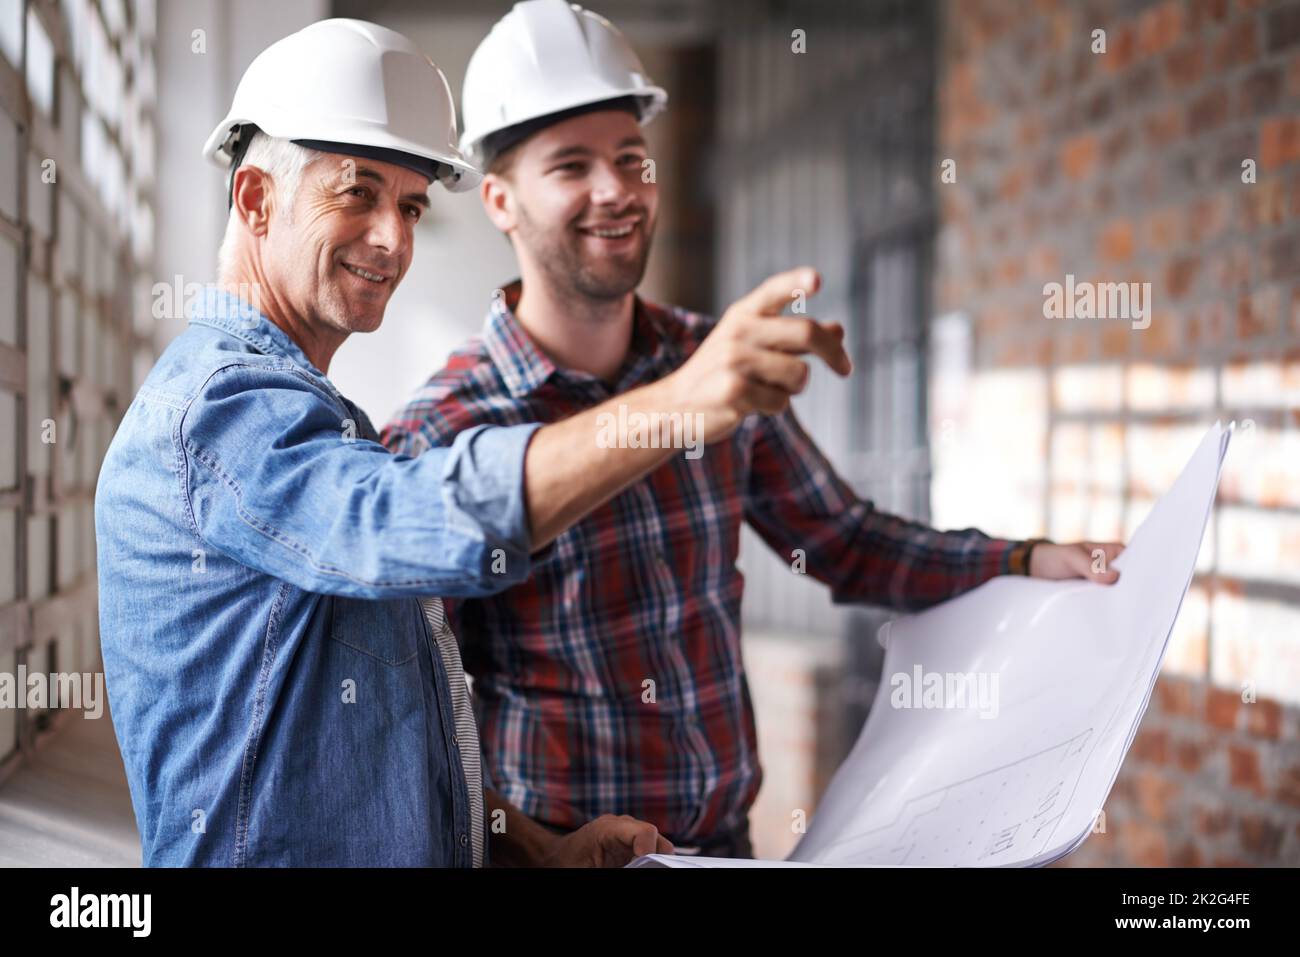 Lets start over there. Shot of two male architects wearing hardhats inspecting a building. Stock Photo